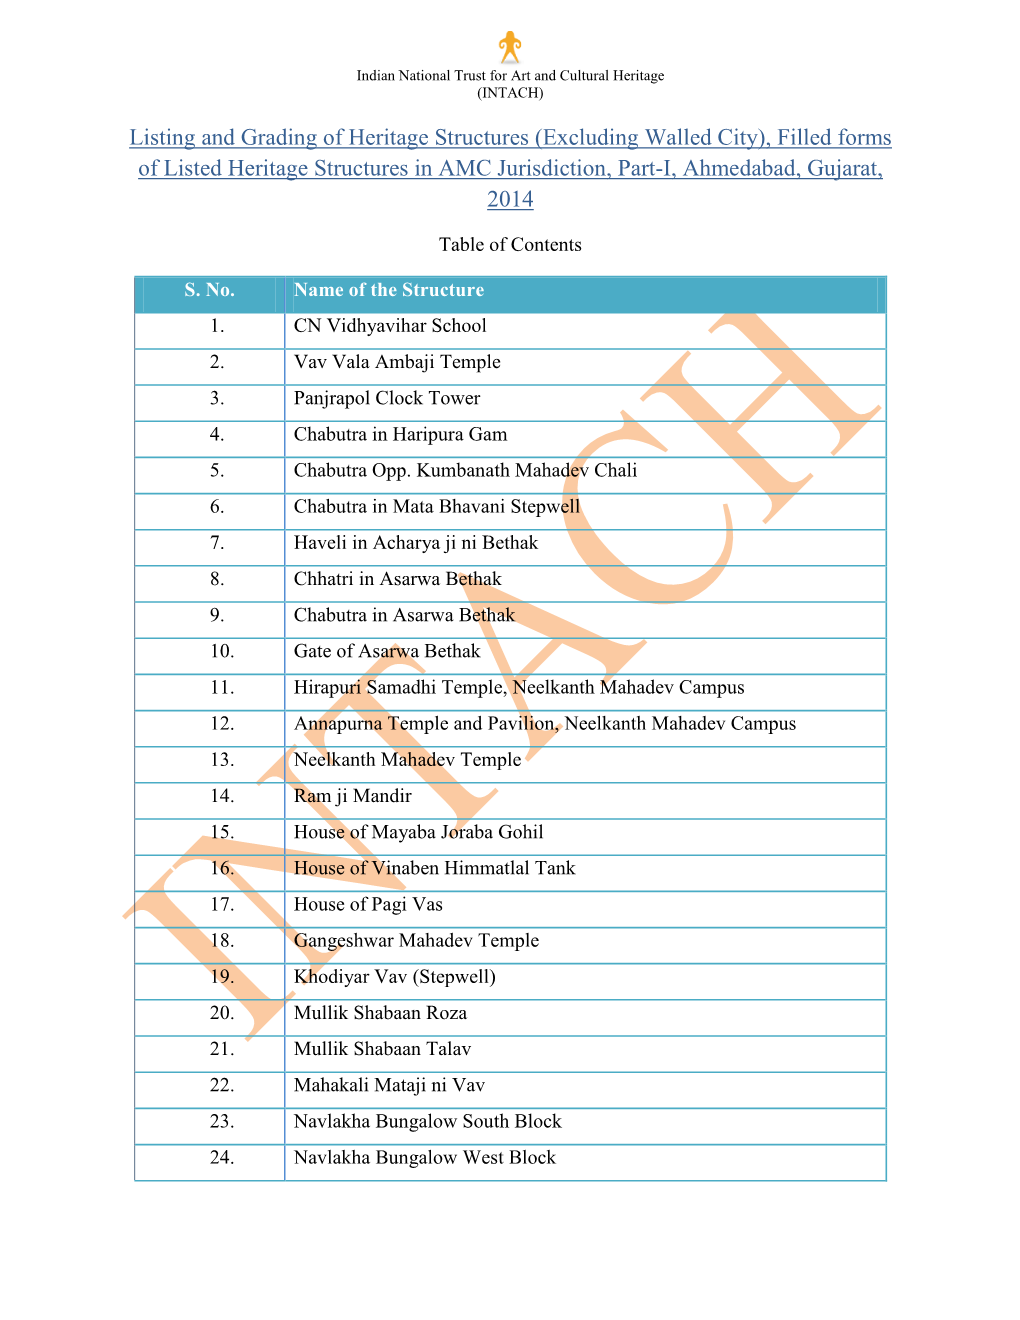 Listing and Grading of Heritage Structures (Excluding Walled City), Filled Forms of Listed Heritage Structures in AMC Jurisdiction, Part-I, Ahmedabad, Gujarat, 2014